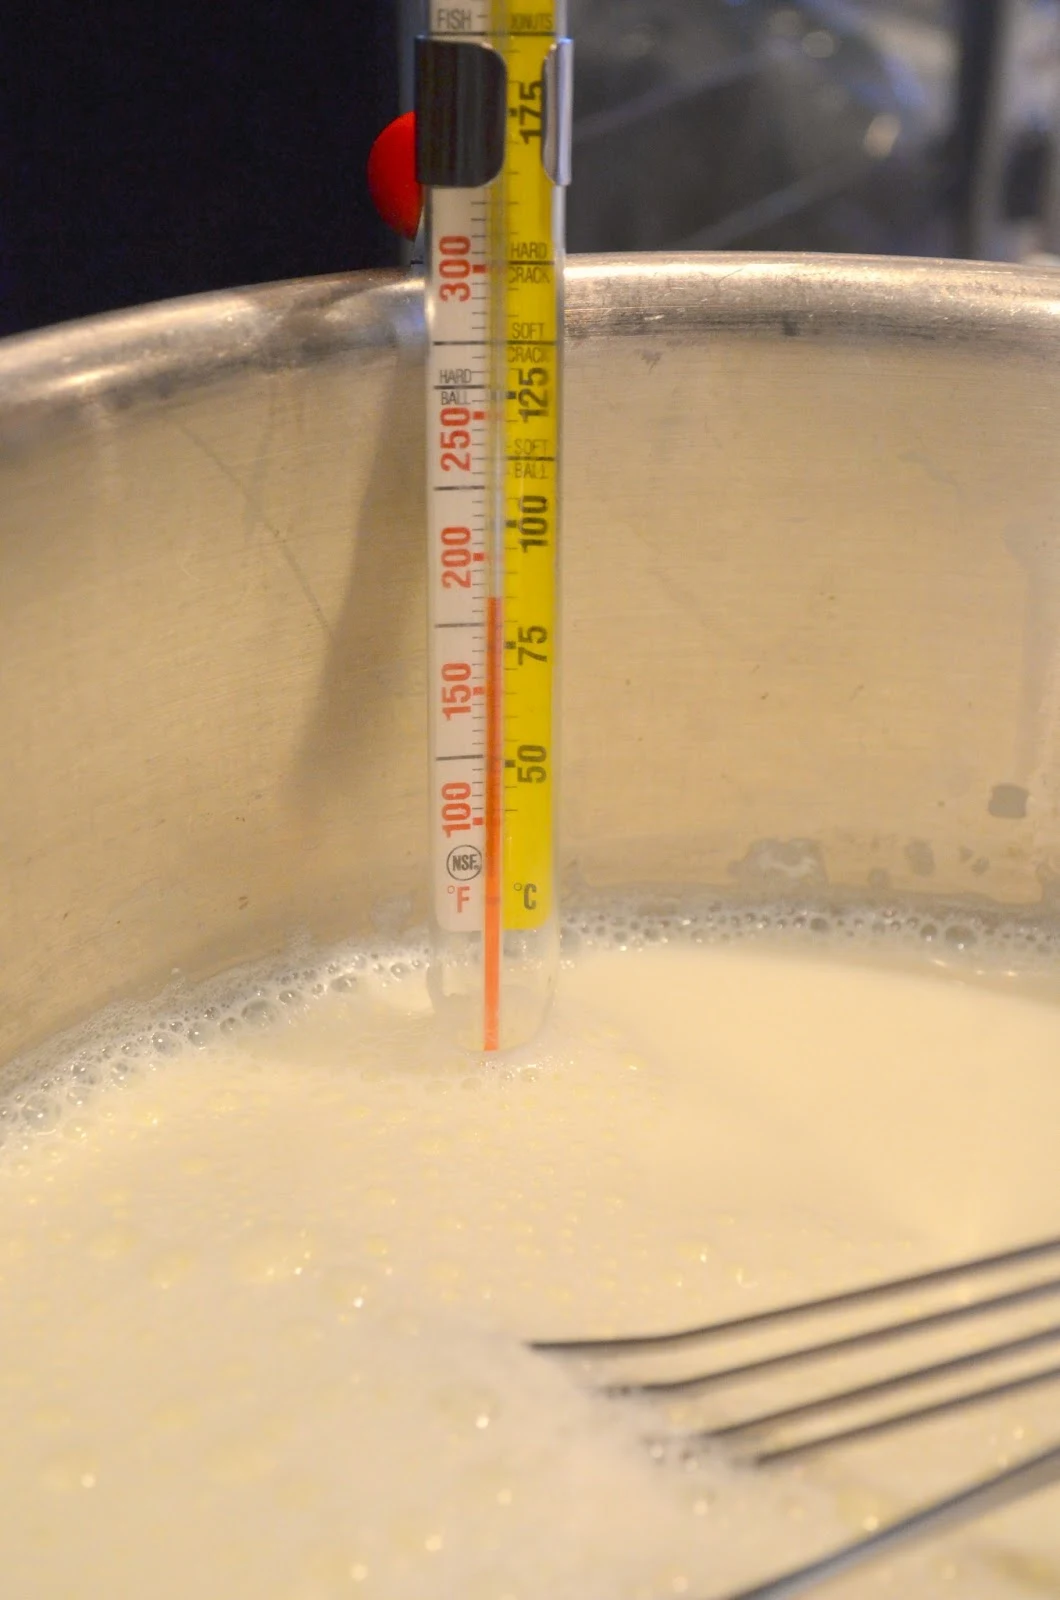 Heat milk to 180 degrees to make Homemade Yogurt from Serena Bakes Simply From Scratch.